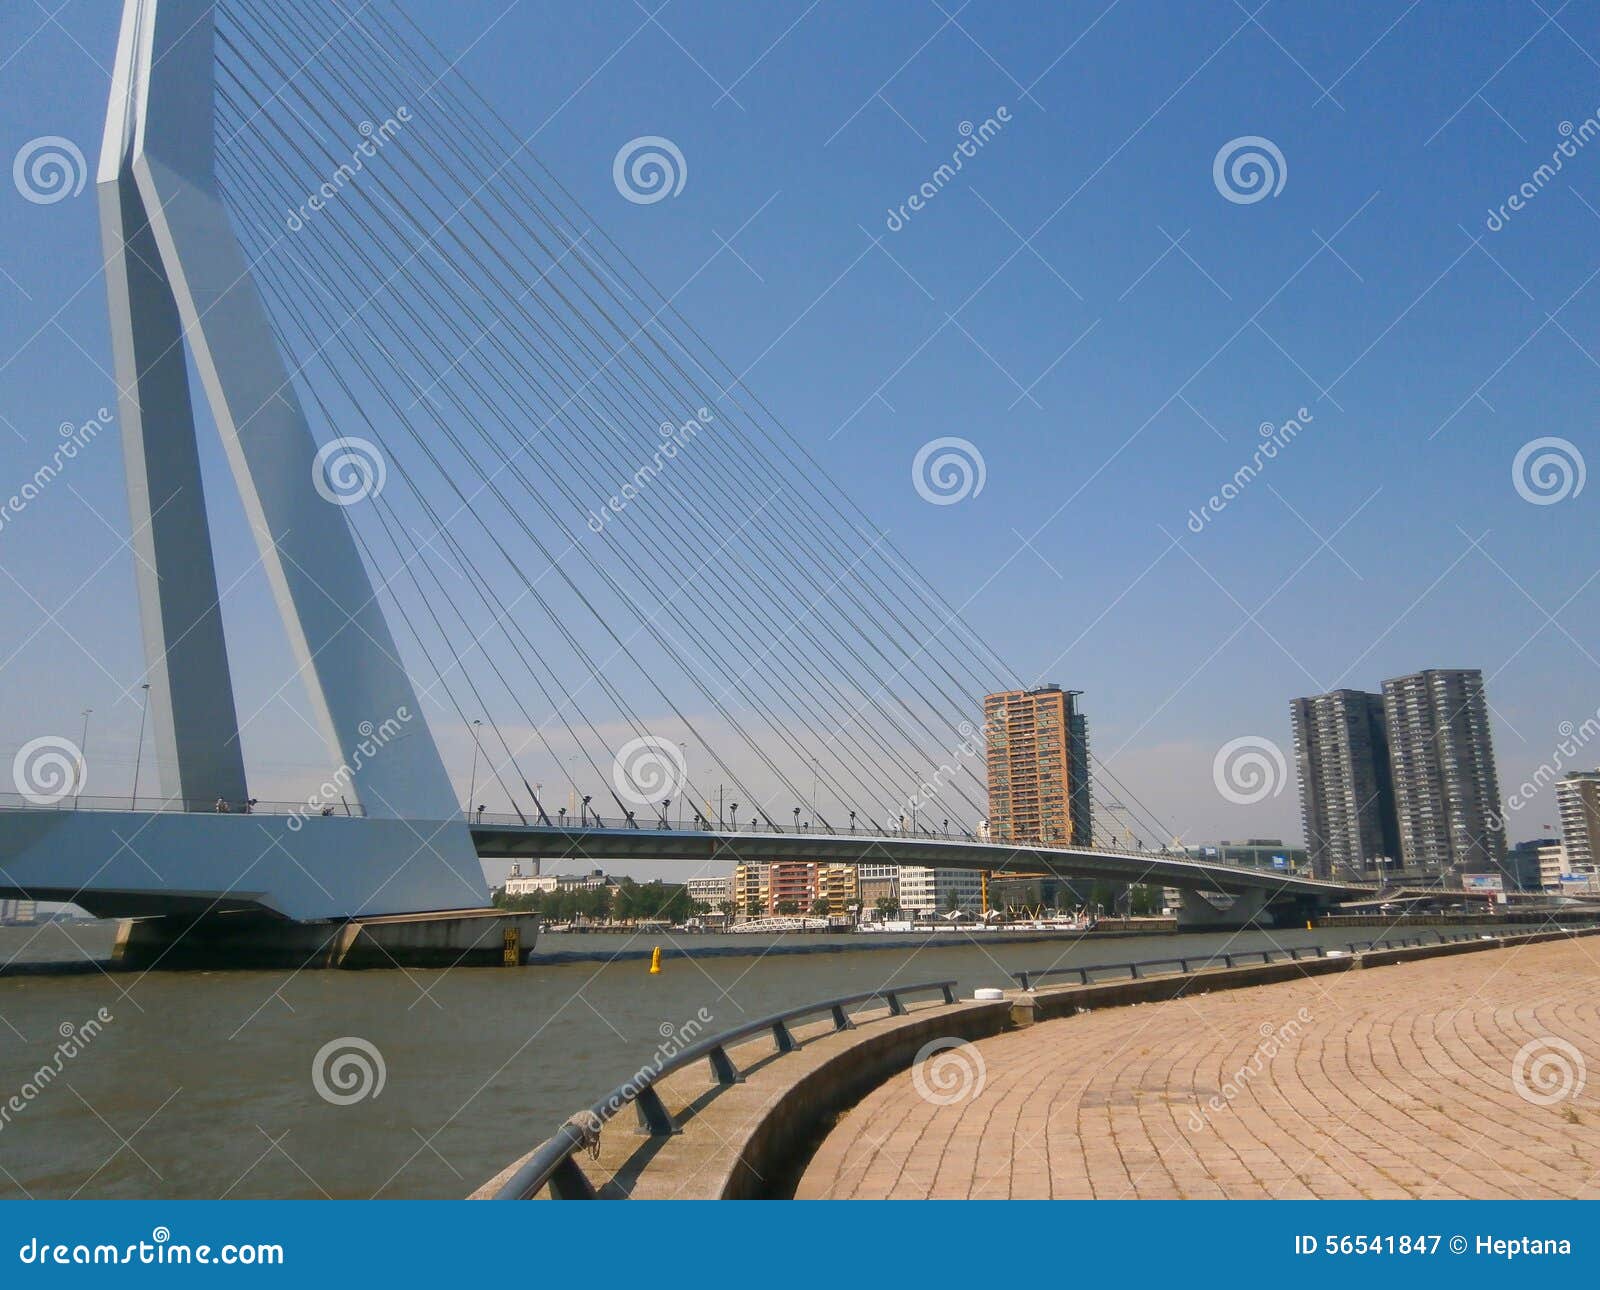 The Erasmus Bridge is a combined cable-stayed and bascule bridge in the centre of Rotterdam, connecting the north and south parts of this city, second largest in the Netherlands.